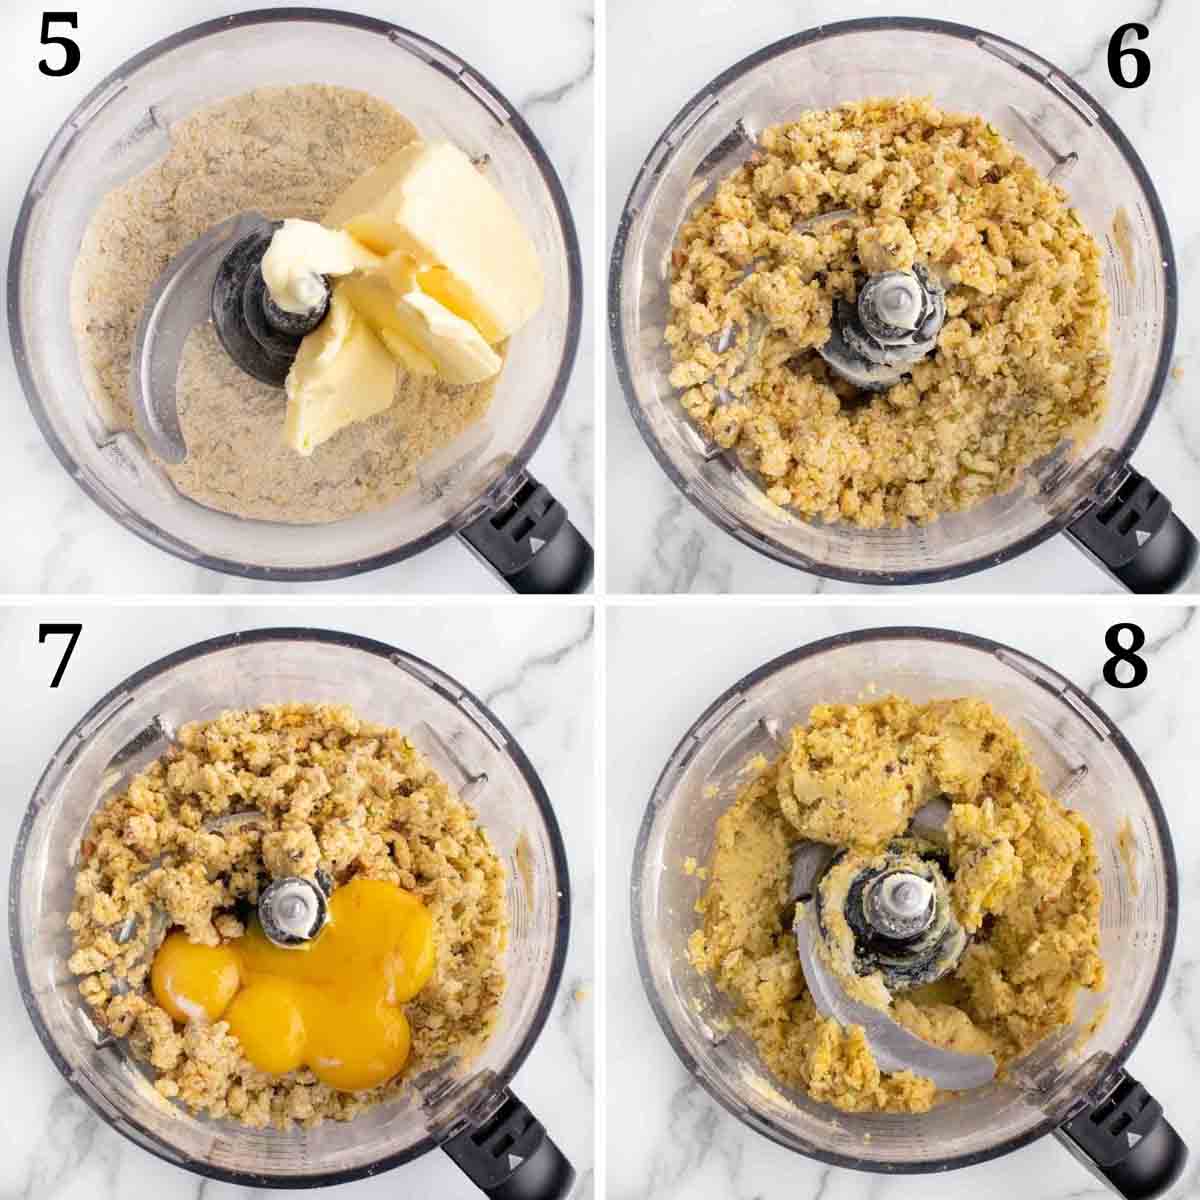 four images showing the next steps in making the cookies